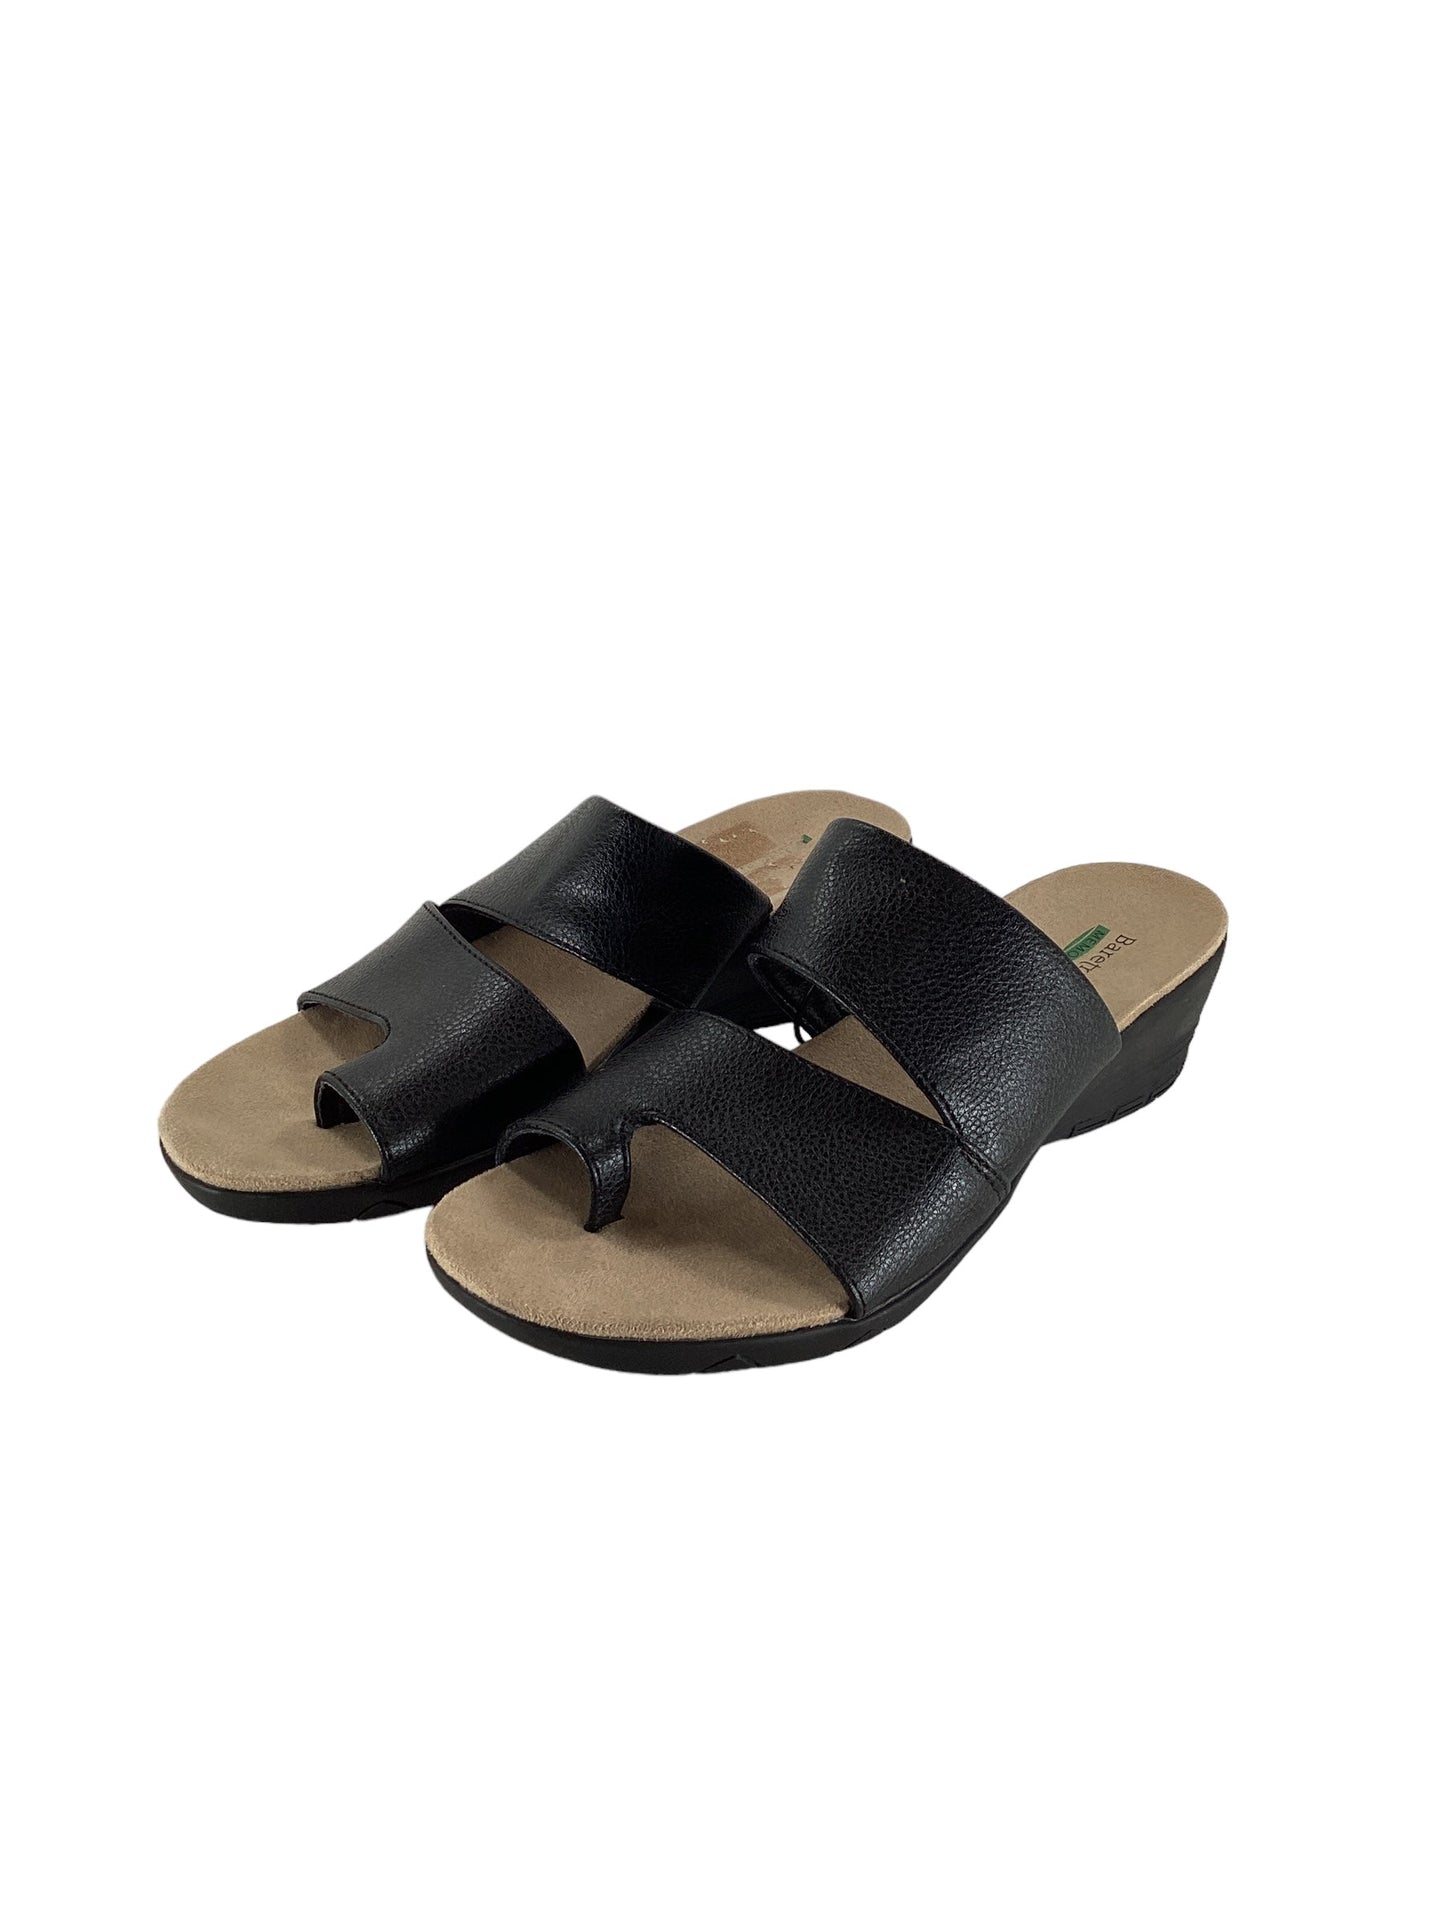 Sandals Heels Wedge By Bare Traps  Size: 7